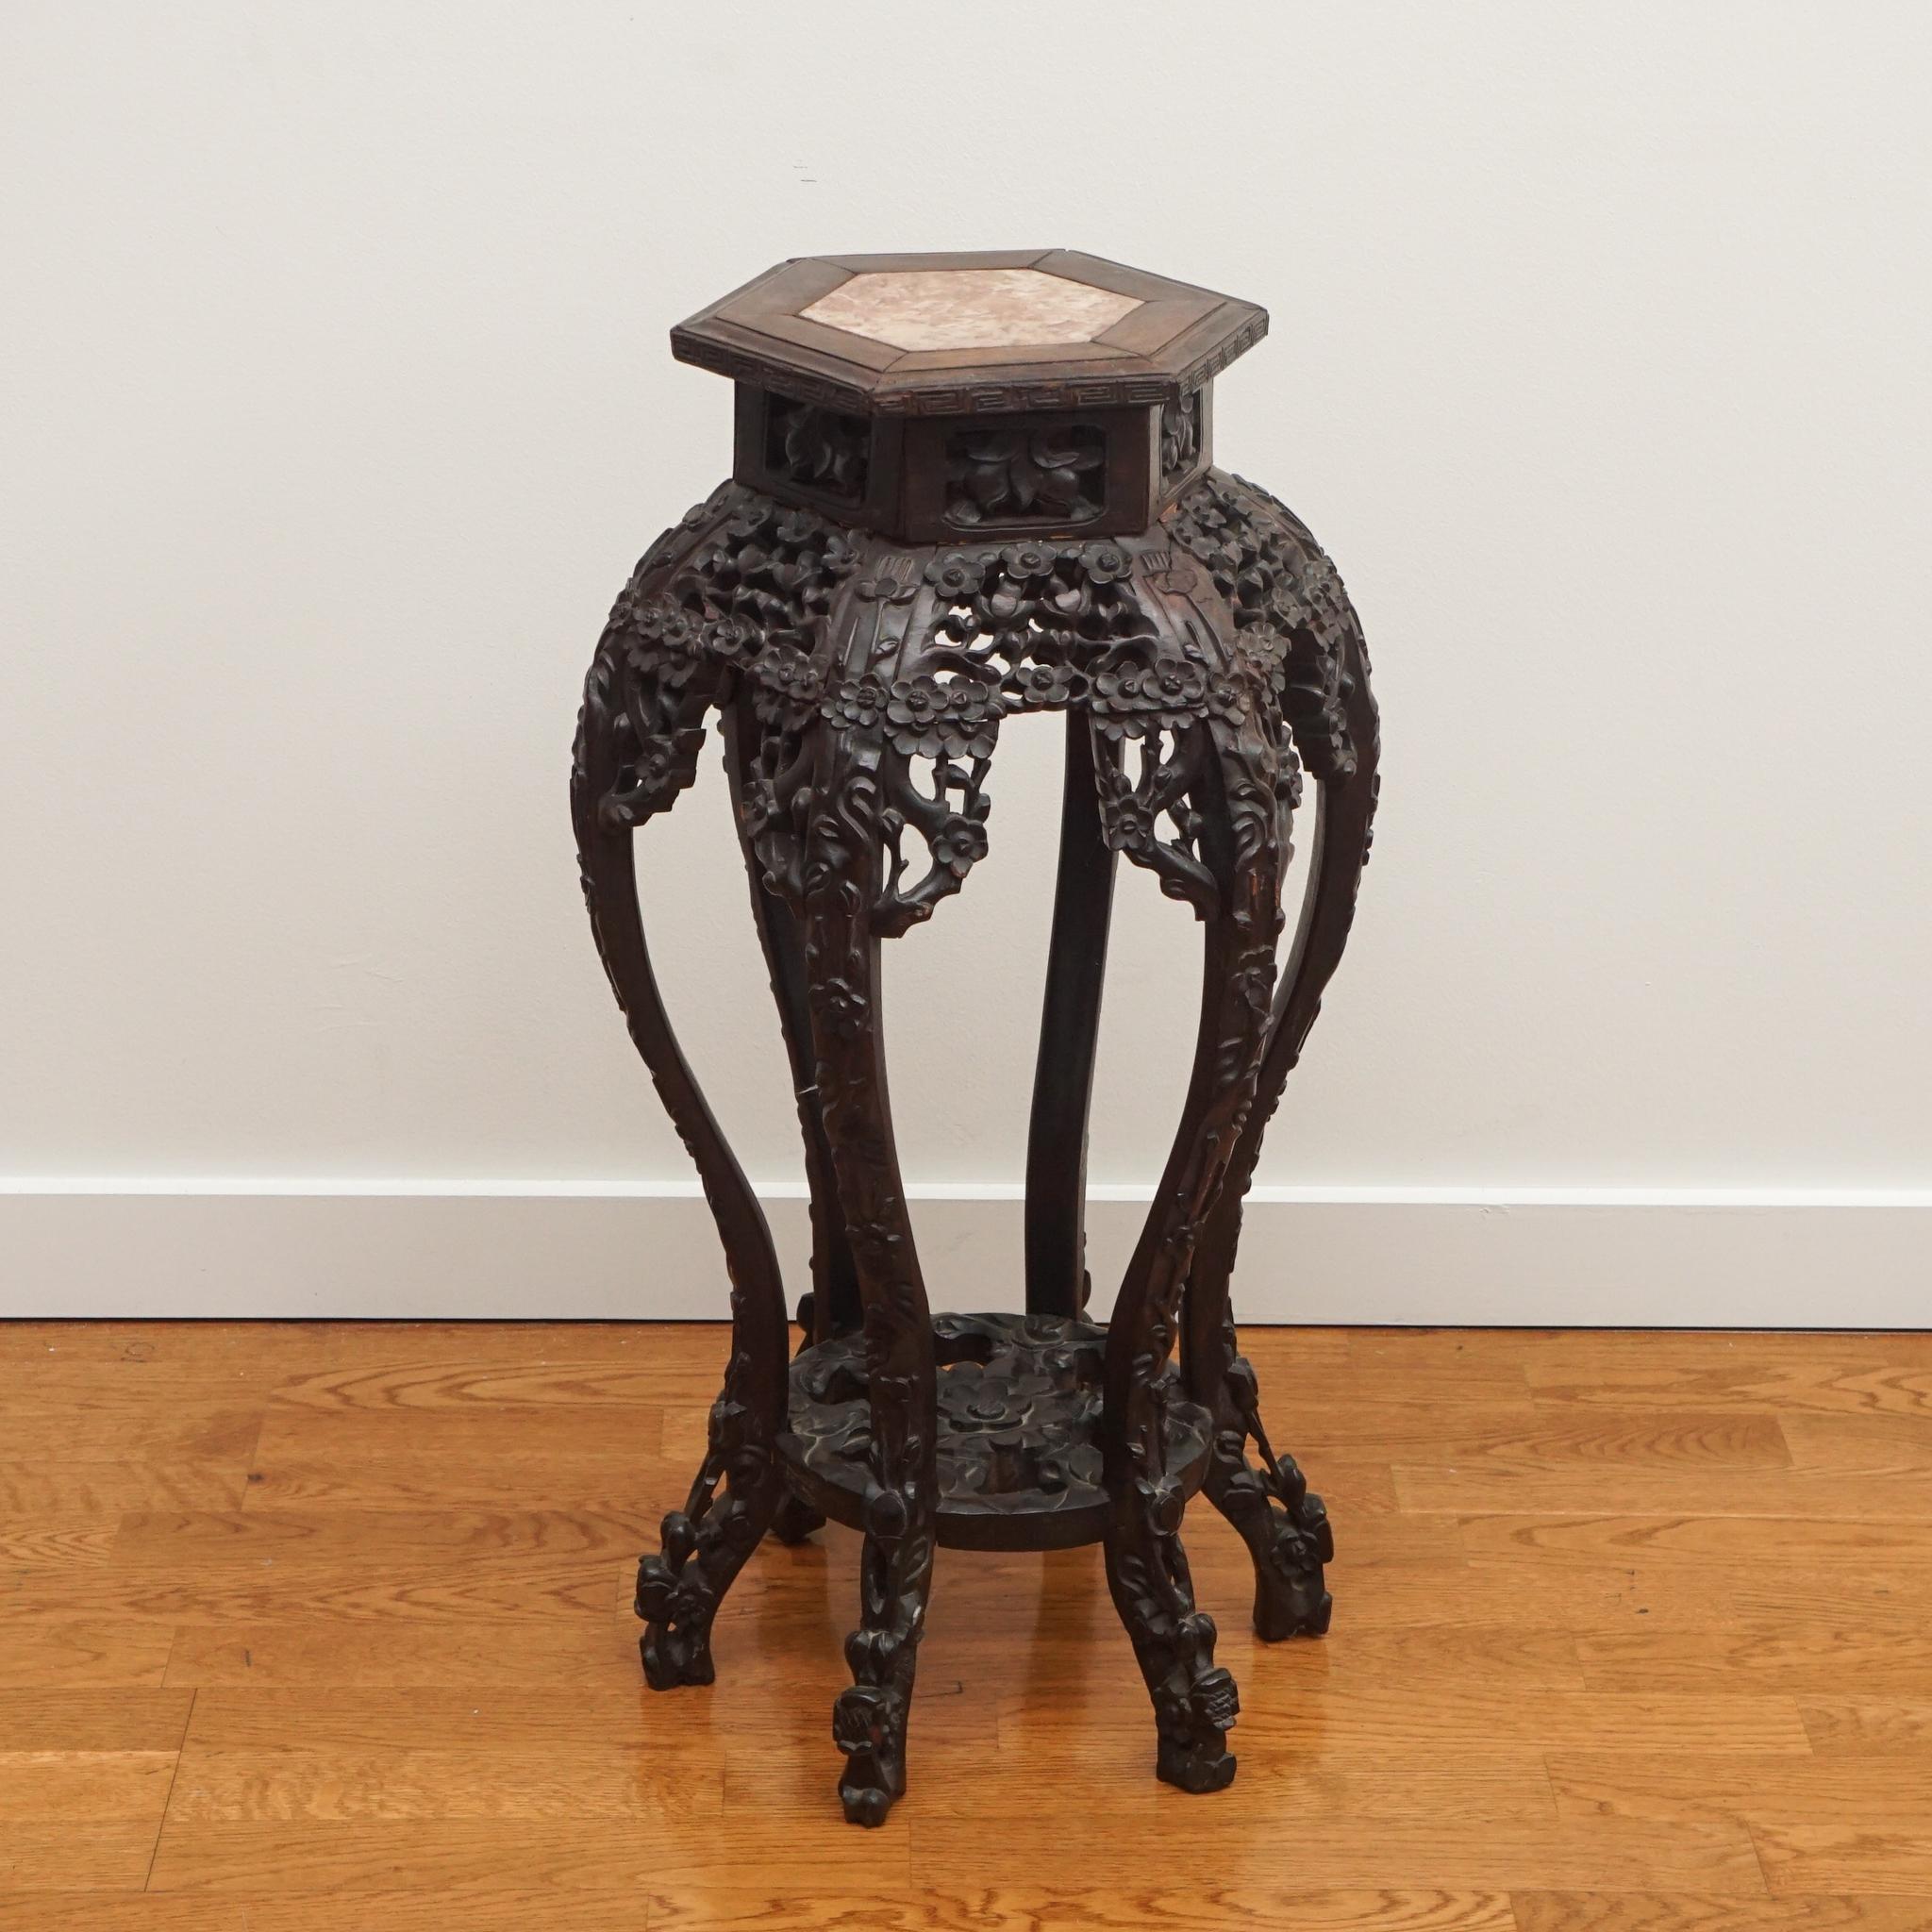 The exquisitely carved rosewood plant stand, shown here, reflects the character of its age and intricate detailing. Made in China in the mid 19th century, the plant stand features an octagonal inset marble top. The shape, scale, and vintage patina